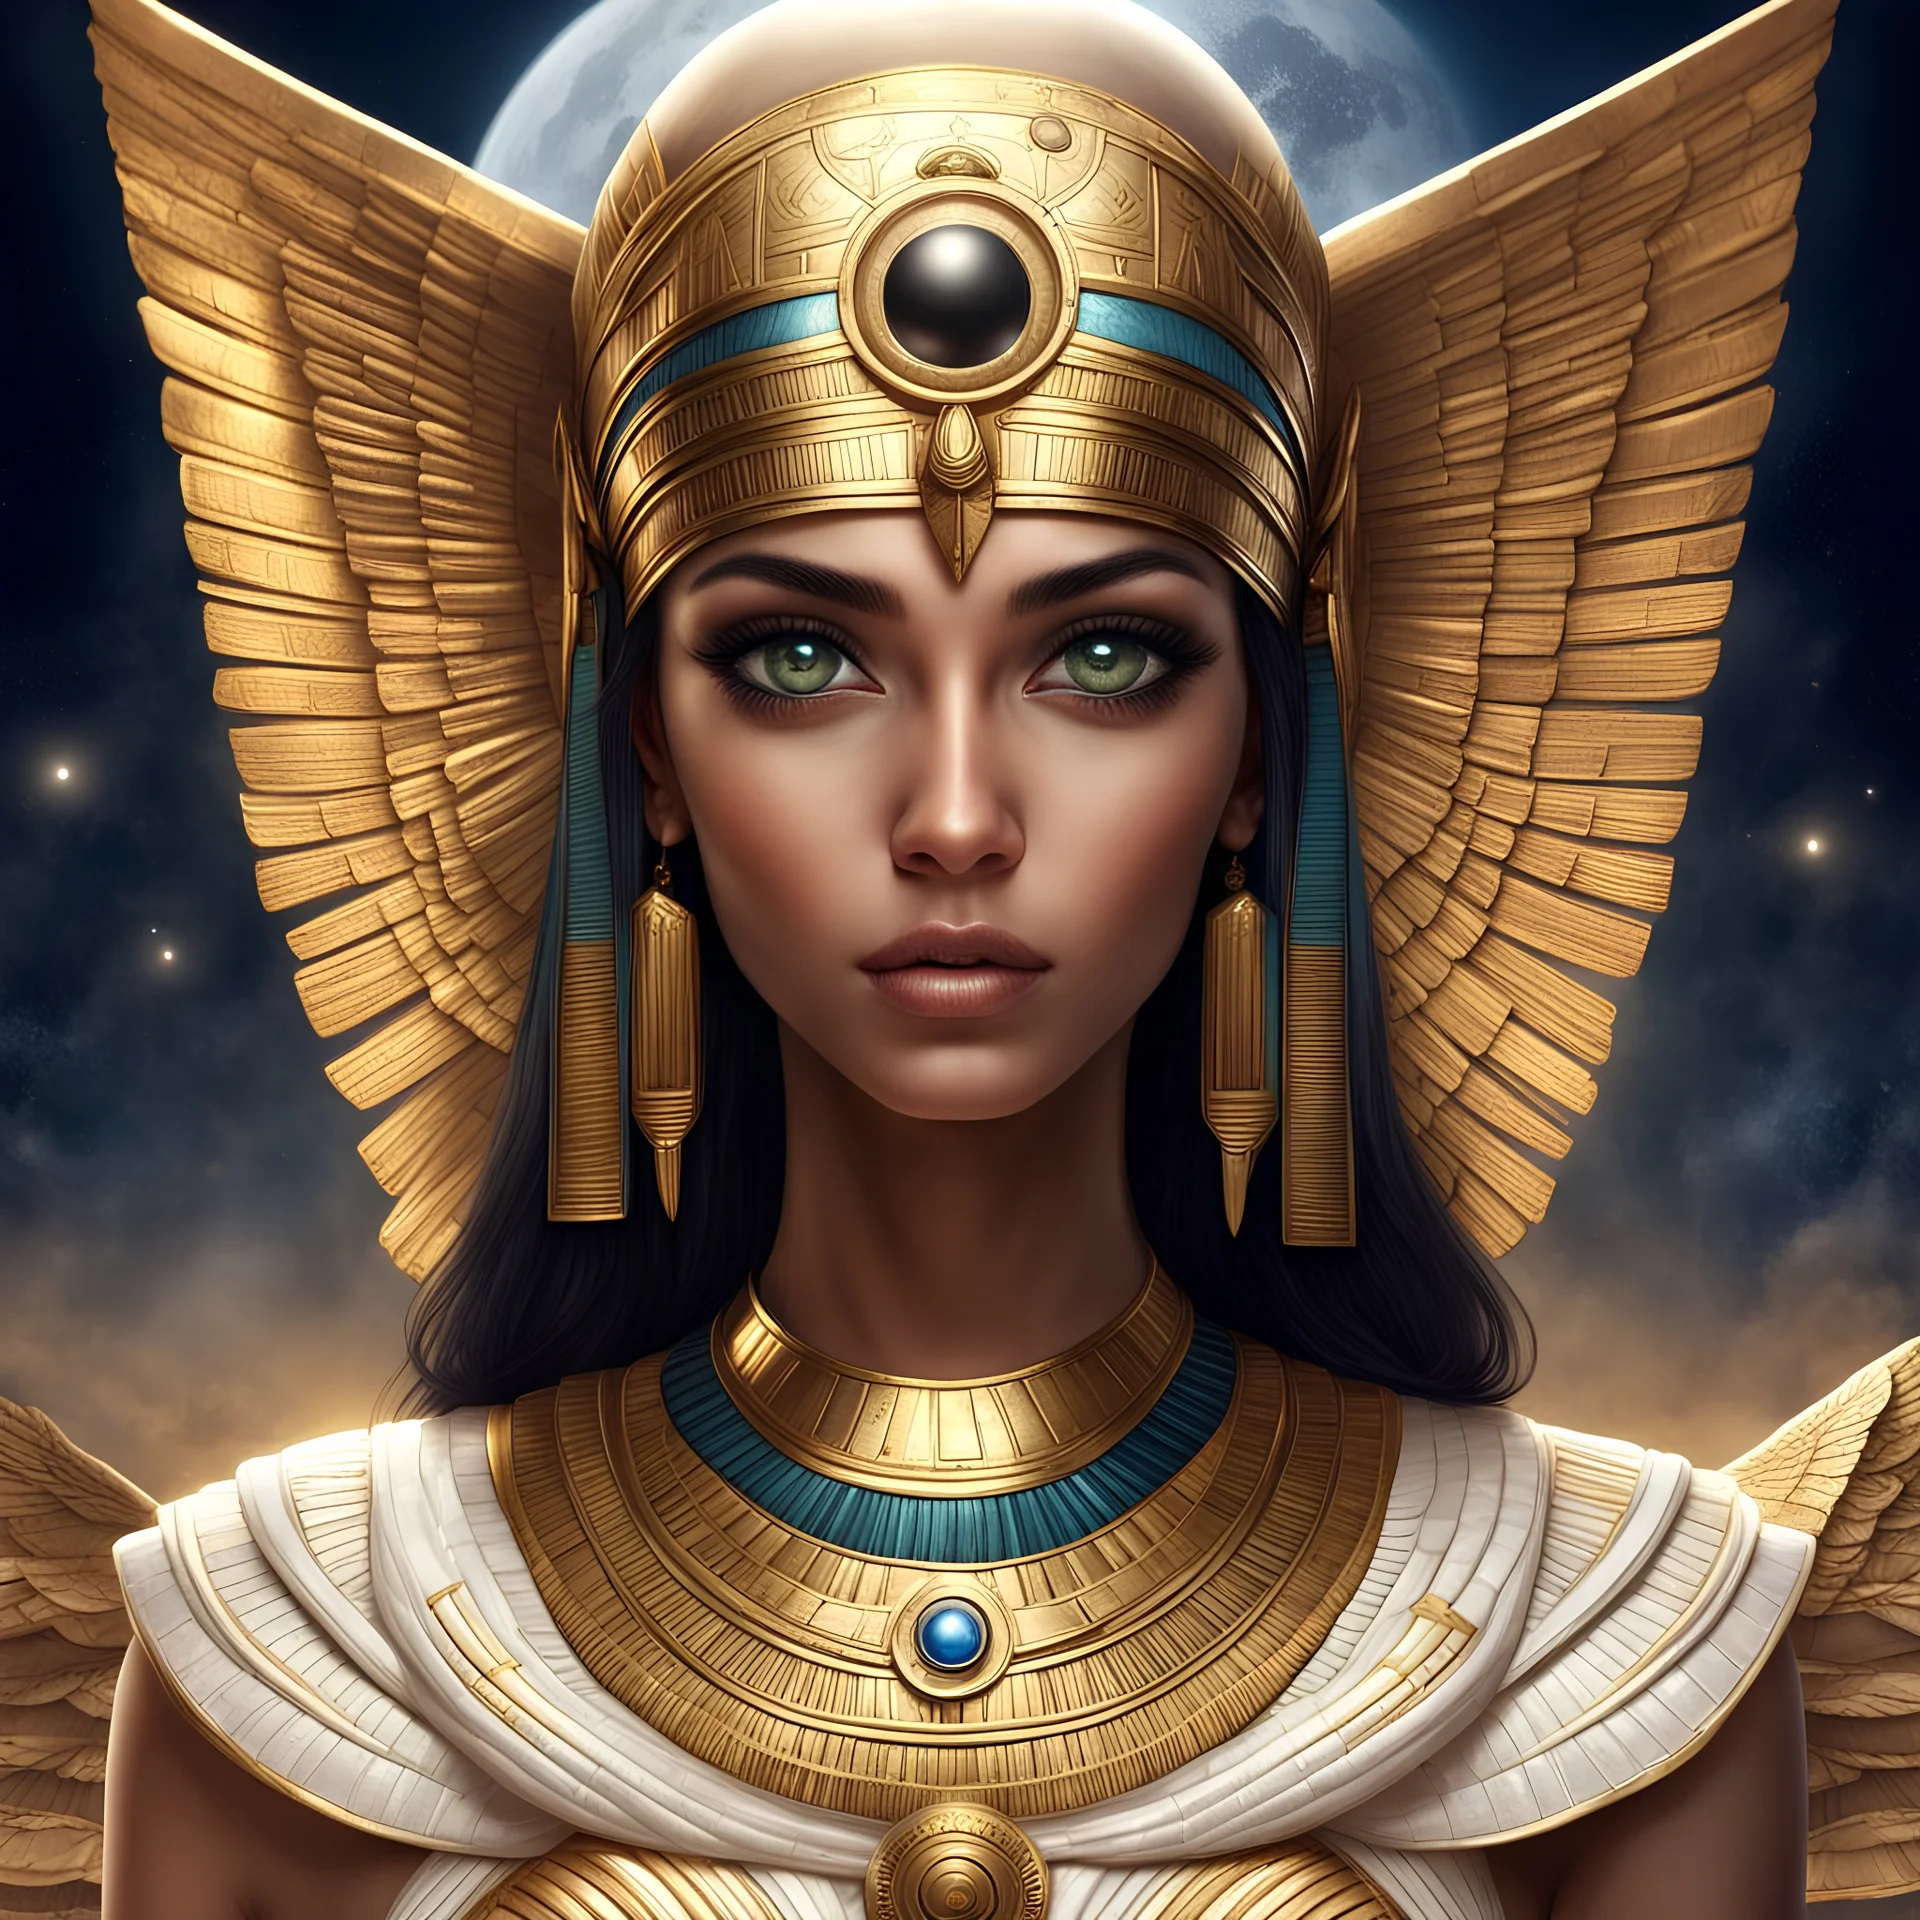 PRETTY EYES ANGEL EGYPTIAN beautiful with simetric eyes, beautiful face and eyes, highly detailed face, GOLD eyes, realistic, PYRAMID background moon SPACESHIPS, Ultra detailed digital art masterpiece, beautiful GIRL 26 yearS old, EGYPTIAN with simetric eyes, SPACESHIPS BACK FLYING